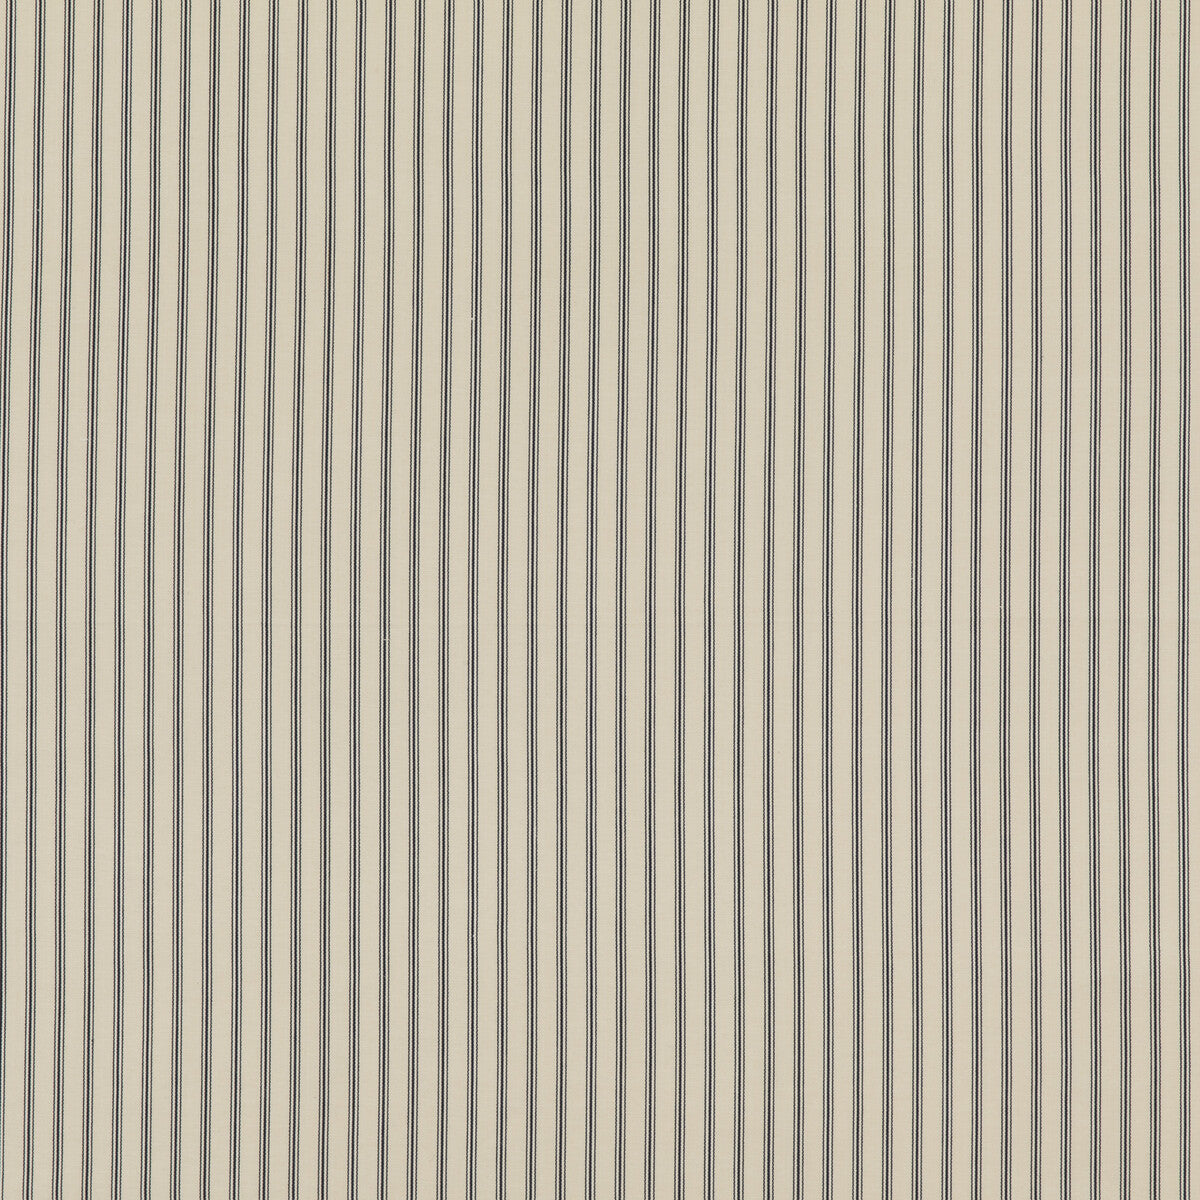 Renwick fabric in midnight color - pattern ED85300.690.0 - by Threads in the Great Stripes collection